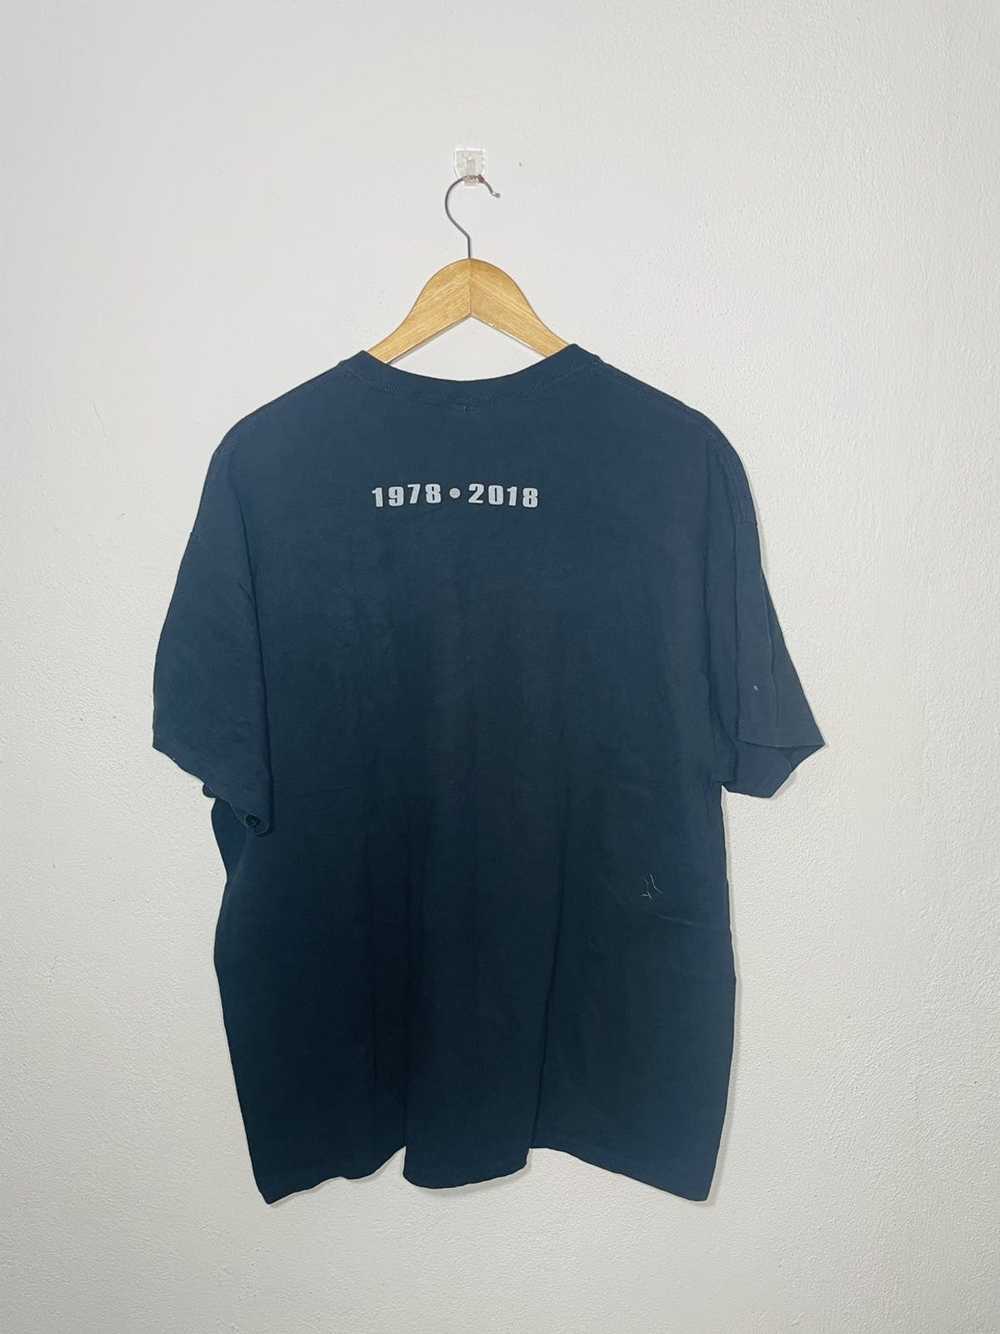 Band Tees × The Cure Rare!! The Cure Band T-Shirt… - image 5